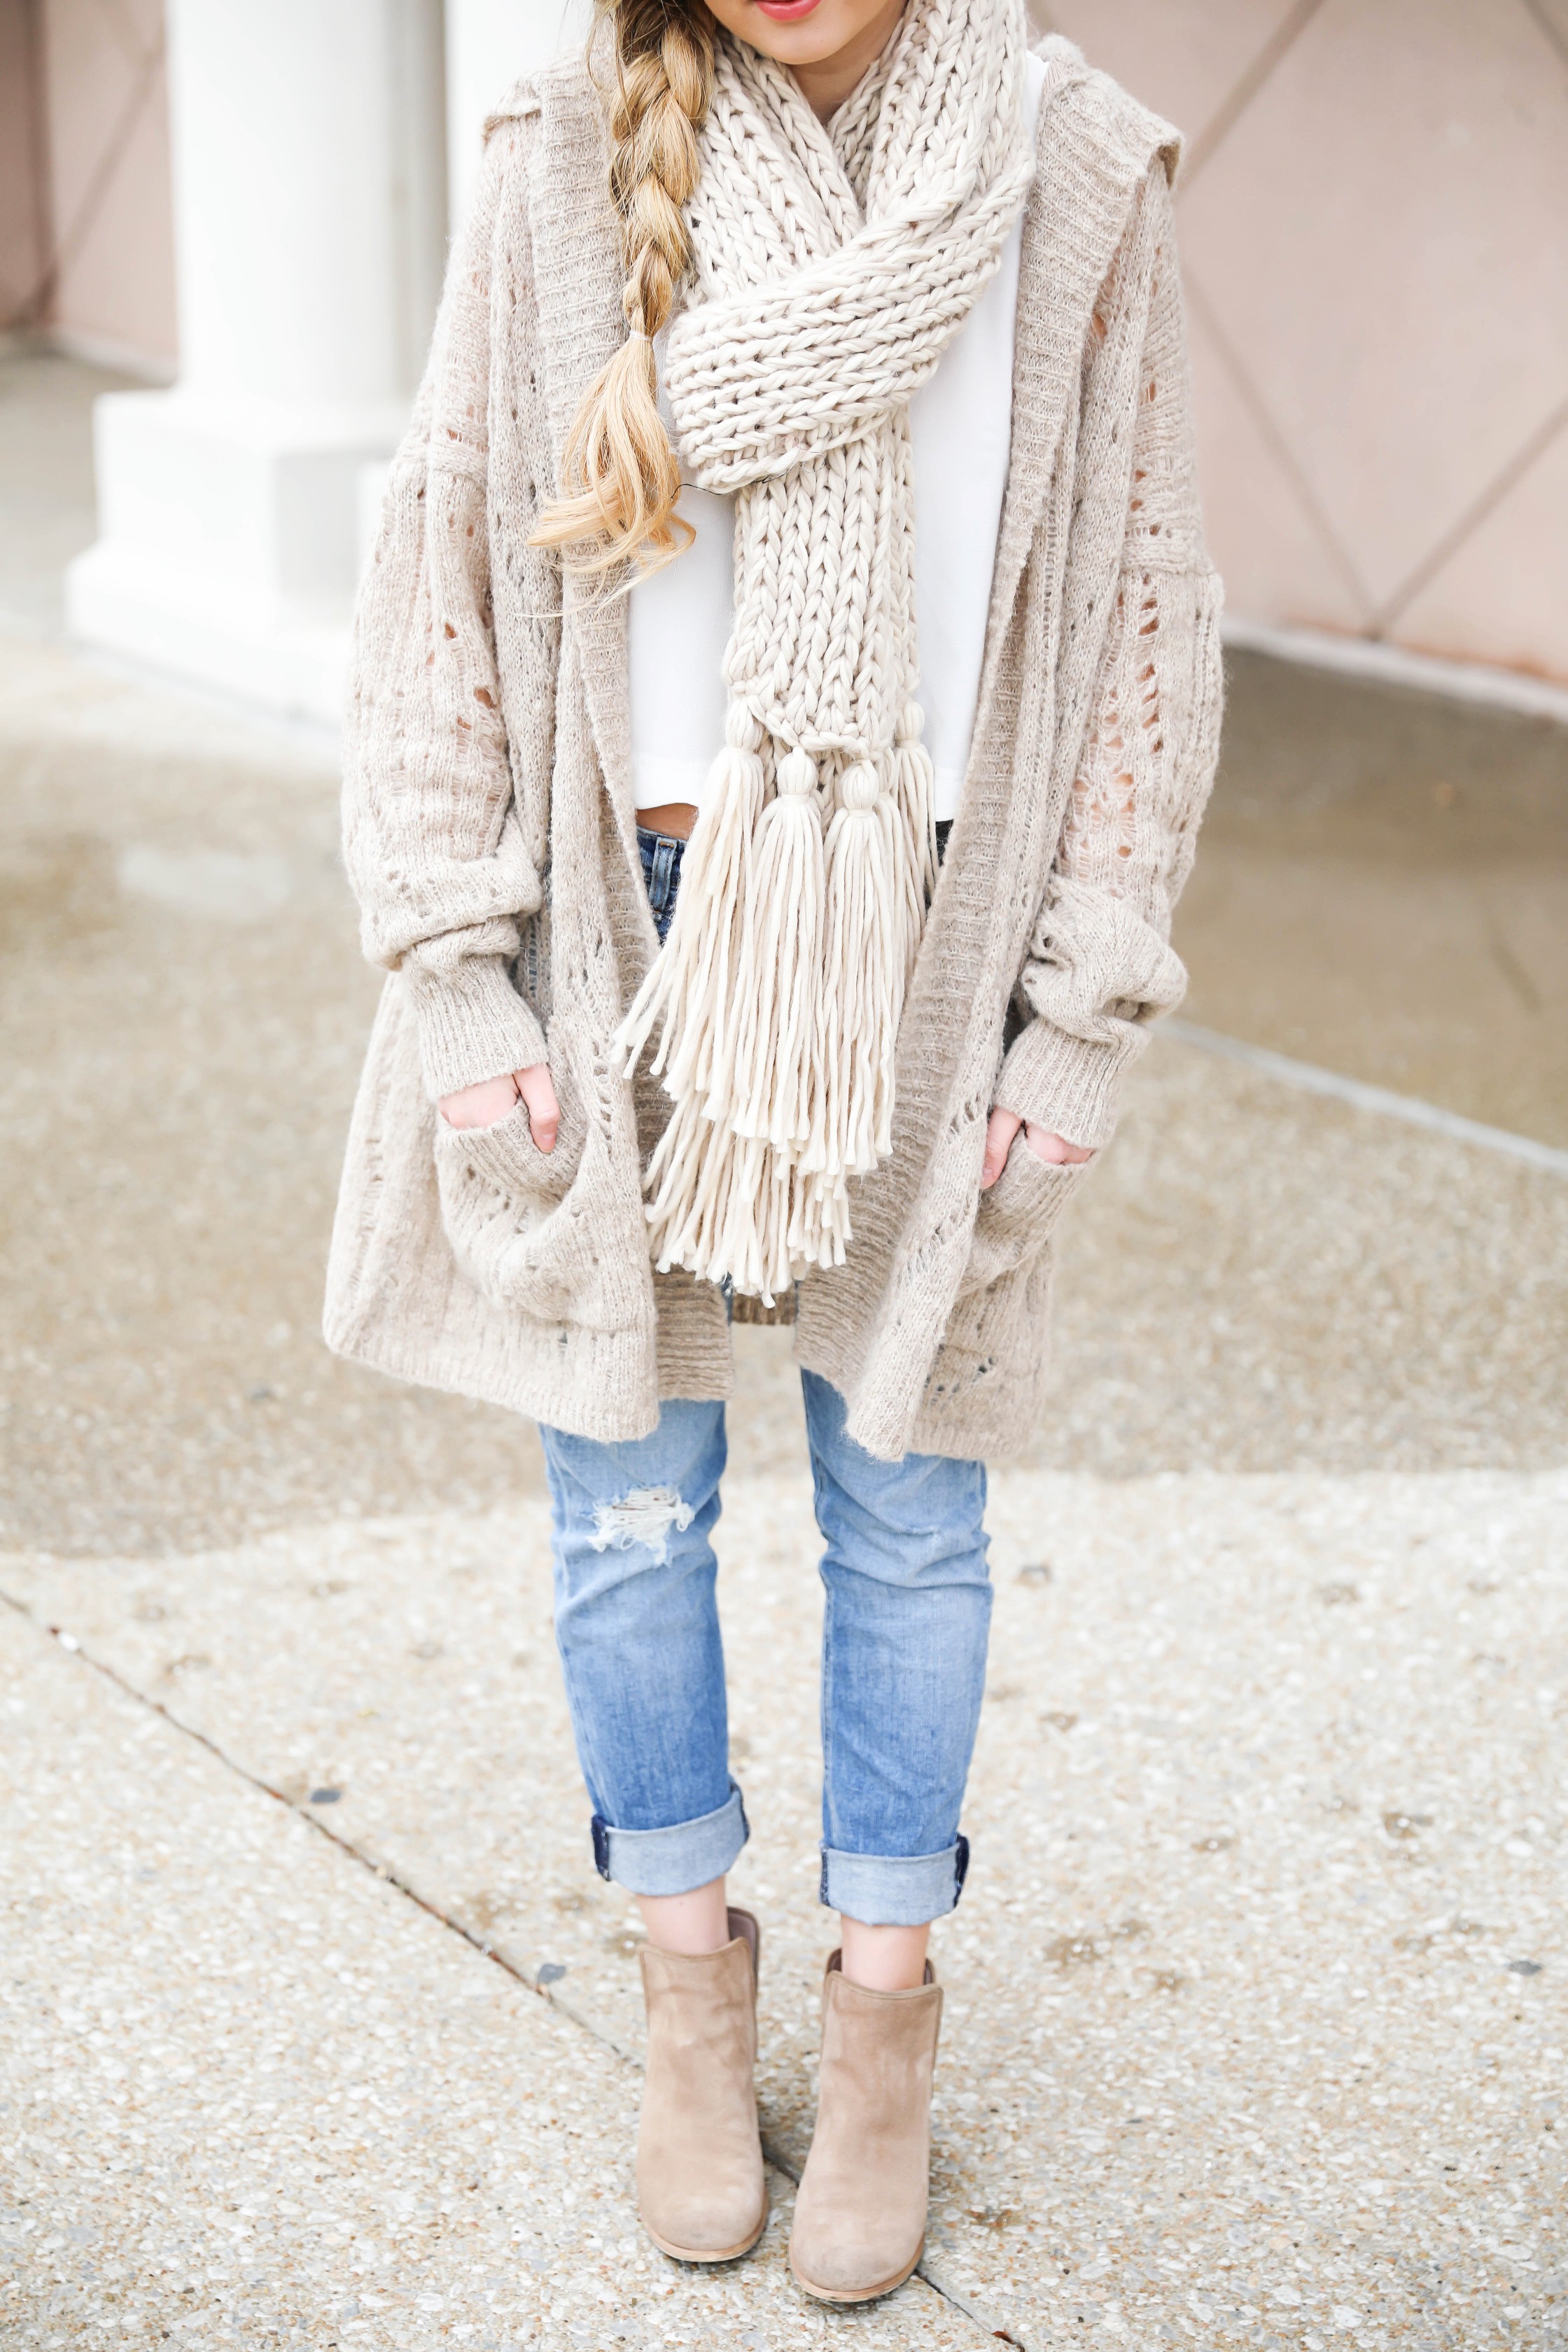 Hooded Free People cardigan! I love this knit cardigan paired with this cozy knit scarf! fit I paired this outfit with my mom jeans to finish the look! Details on fashion blog daily dose of charm by lauren lindmark